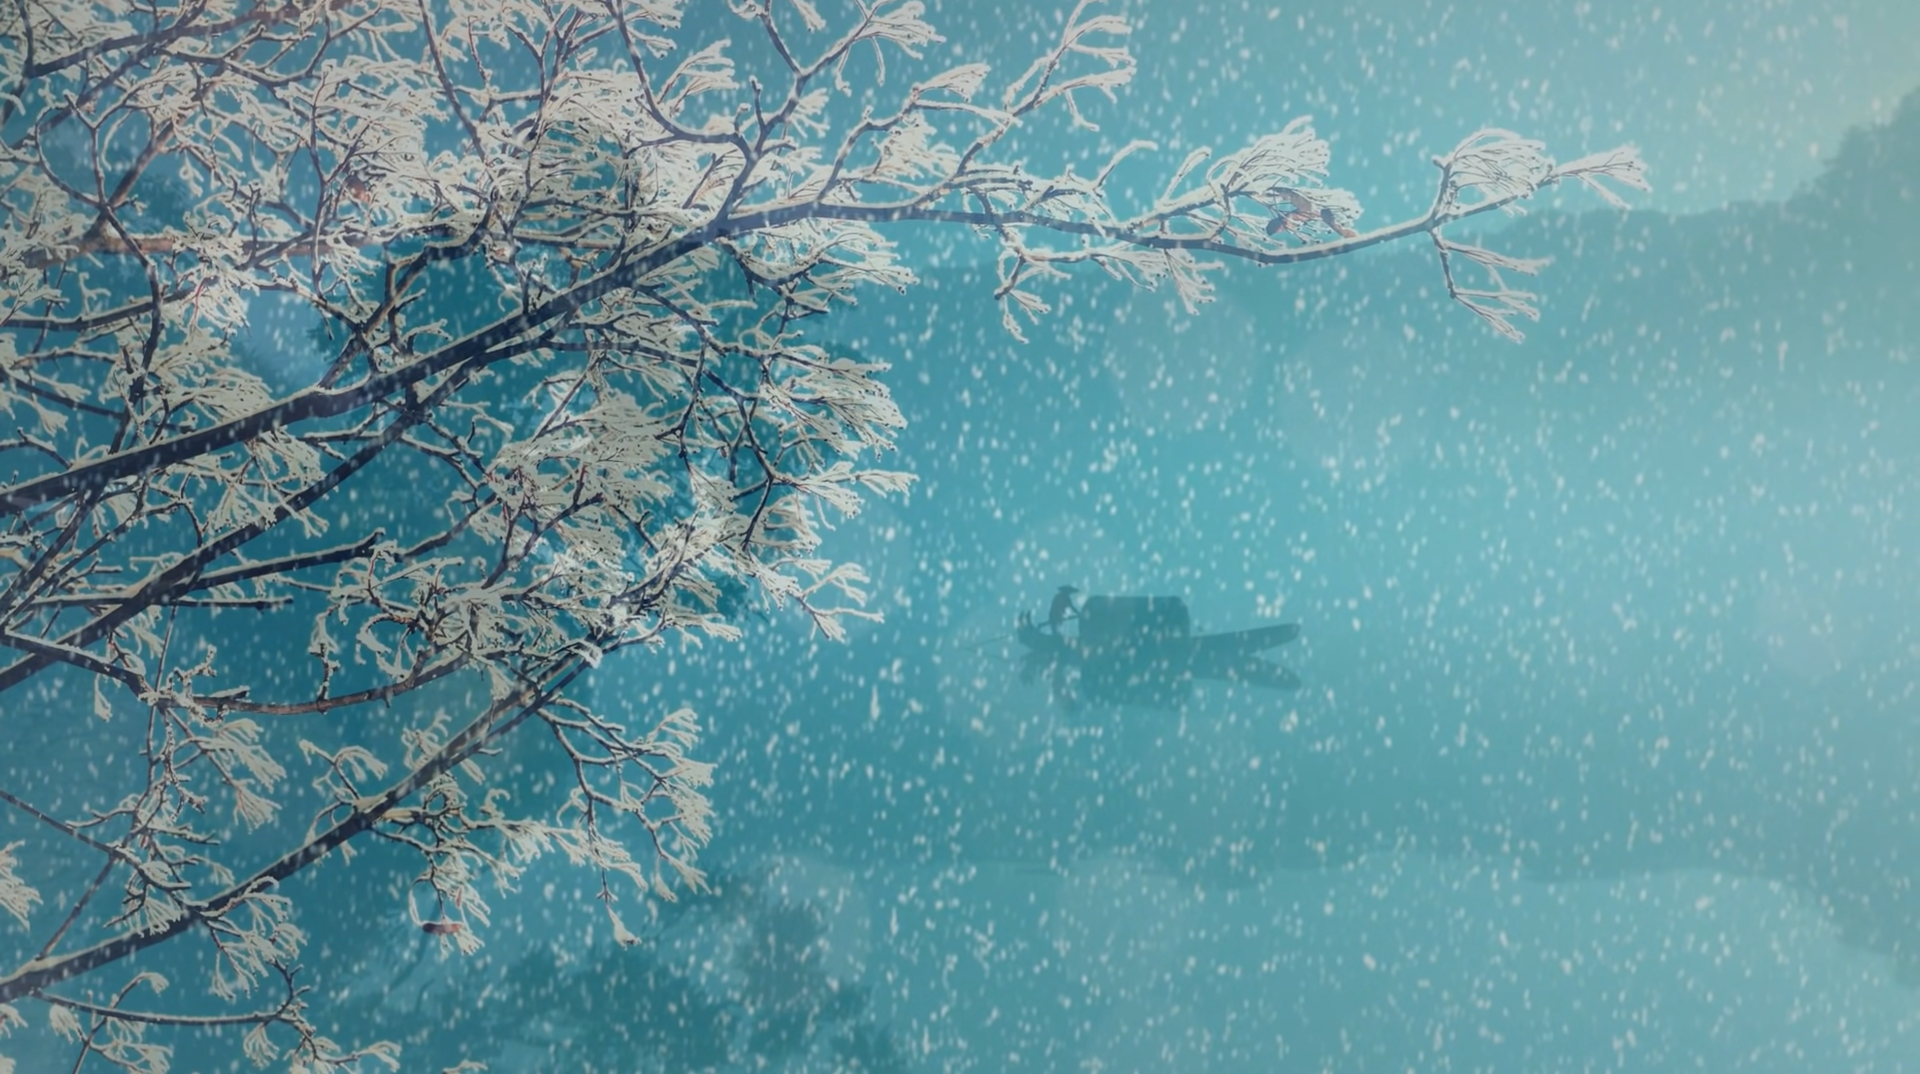 General 1920x1074 snow fisherman plants trees ice cold nature outdoors snowing cyan blue